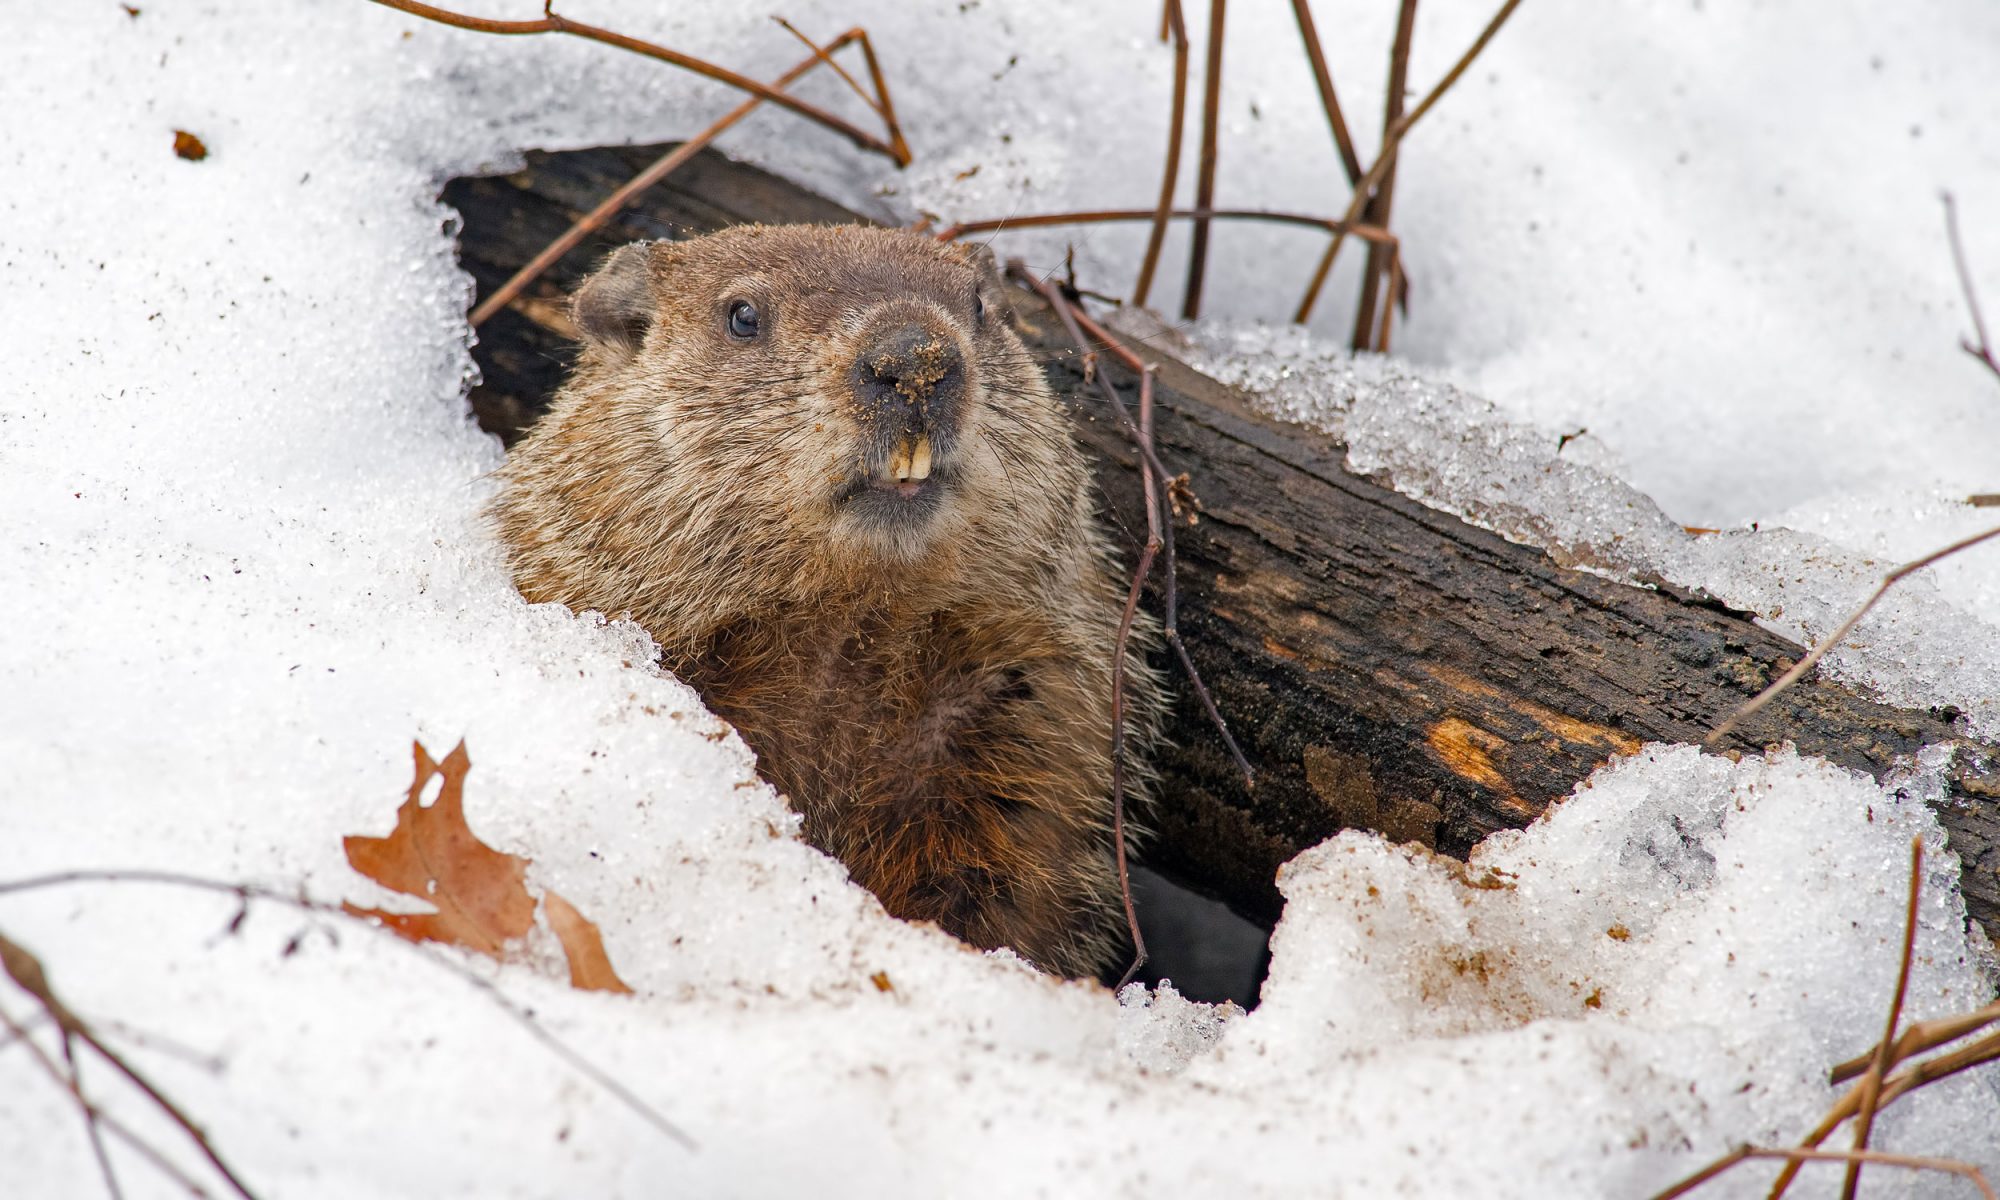 EC: So, Can You Eat Groundhog?